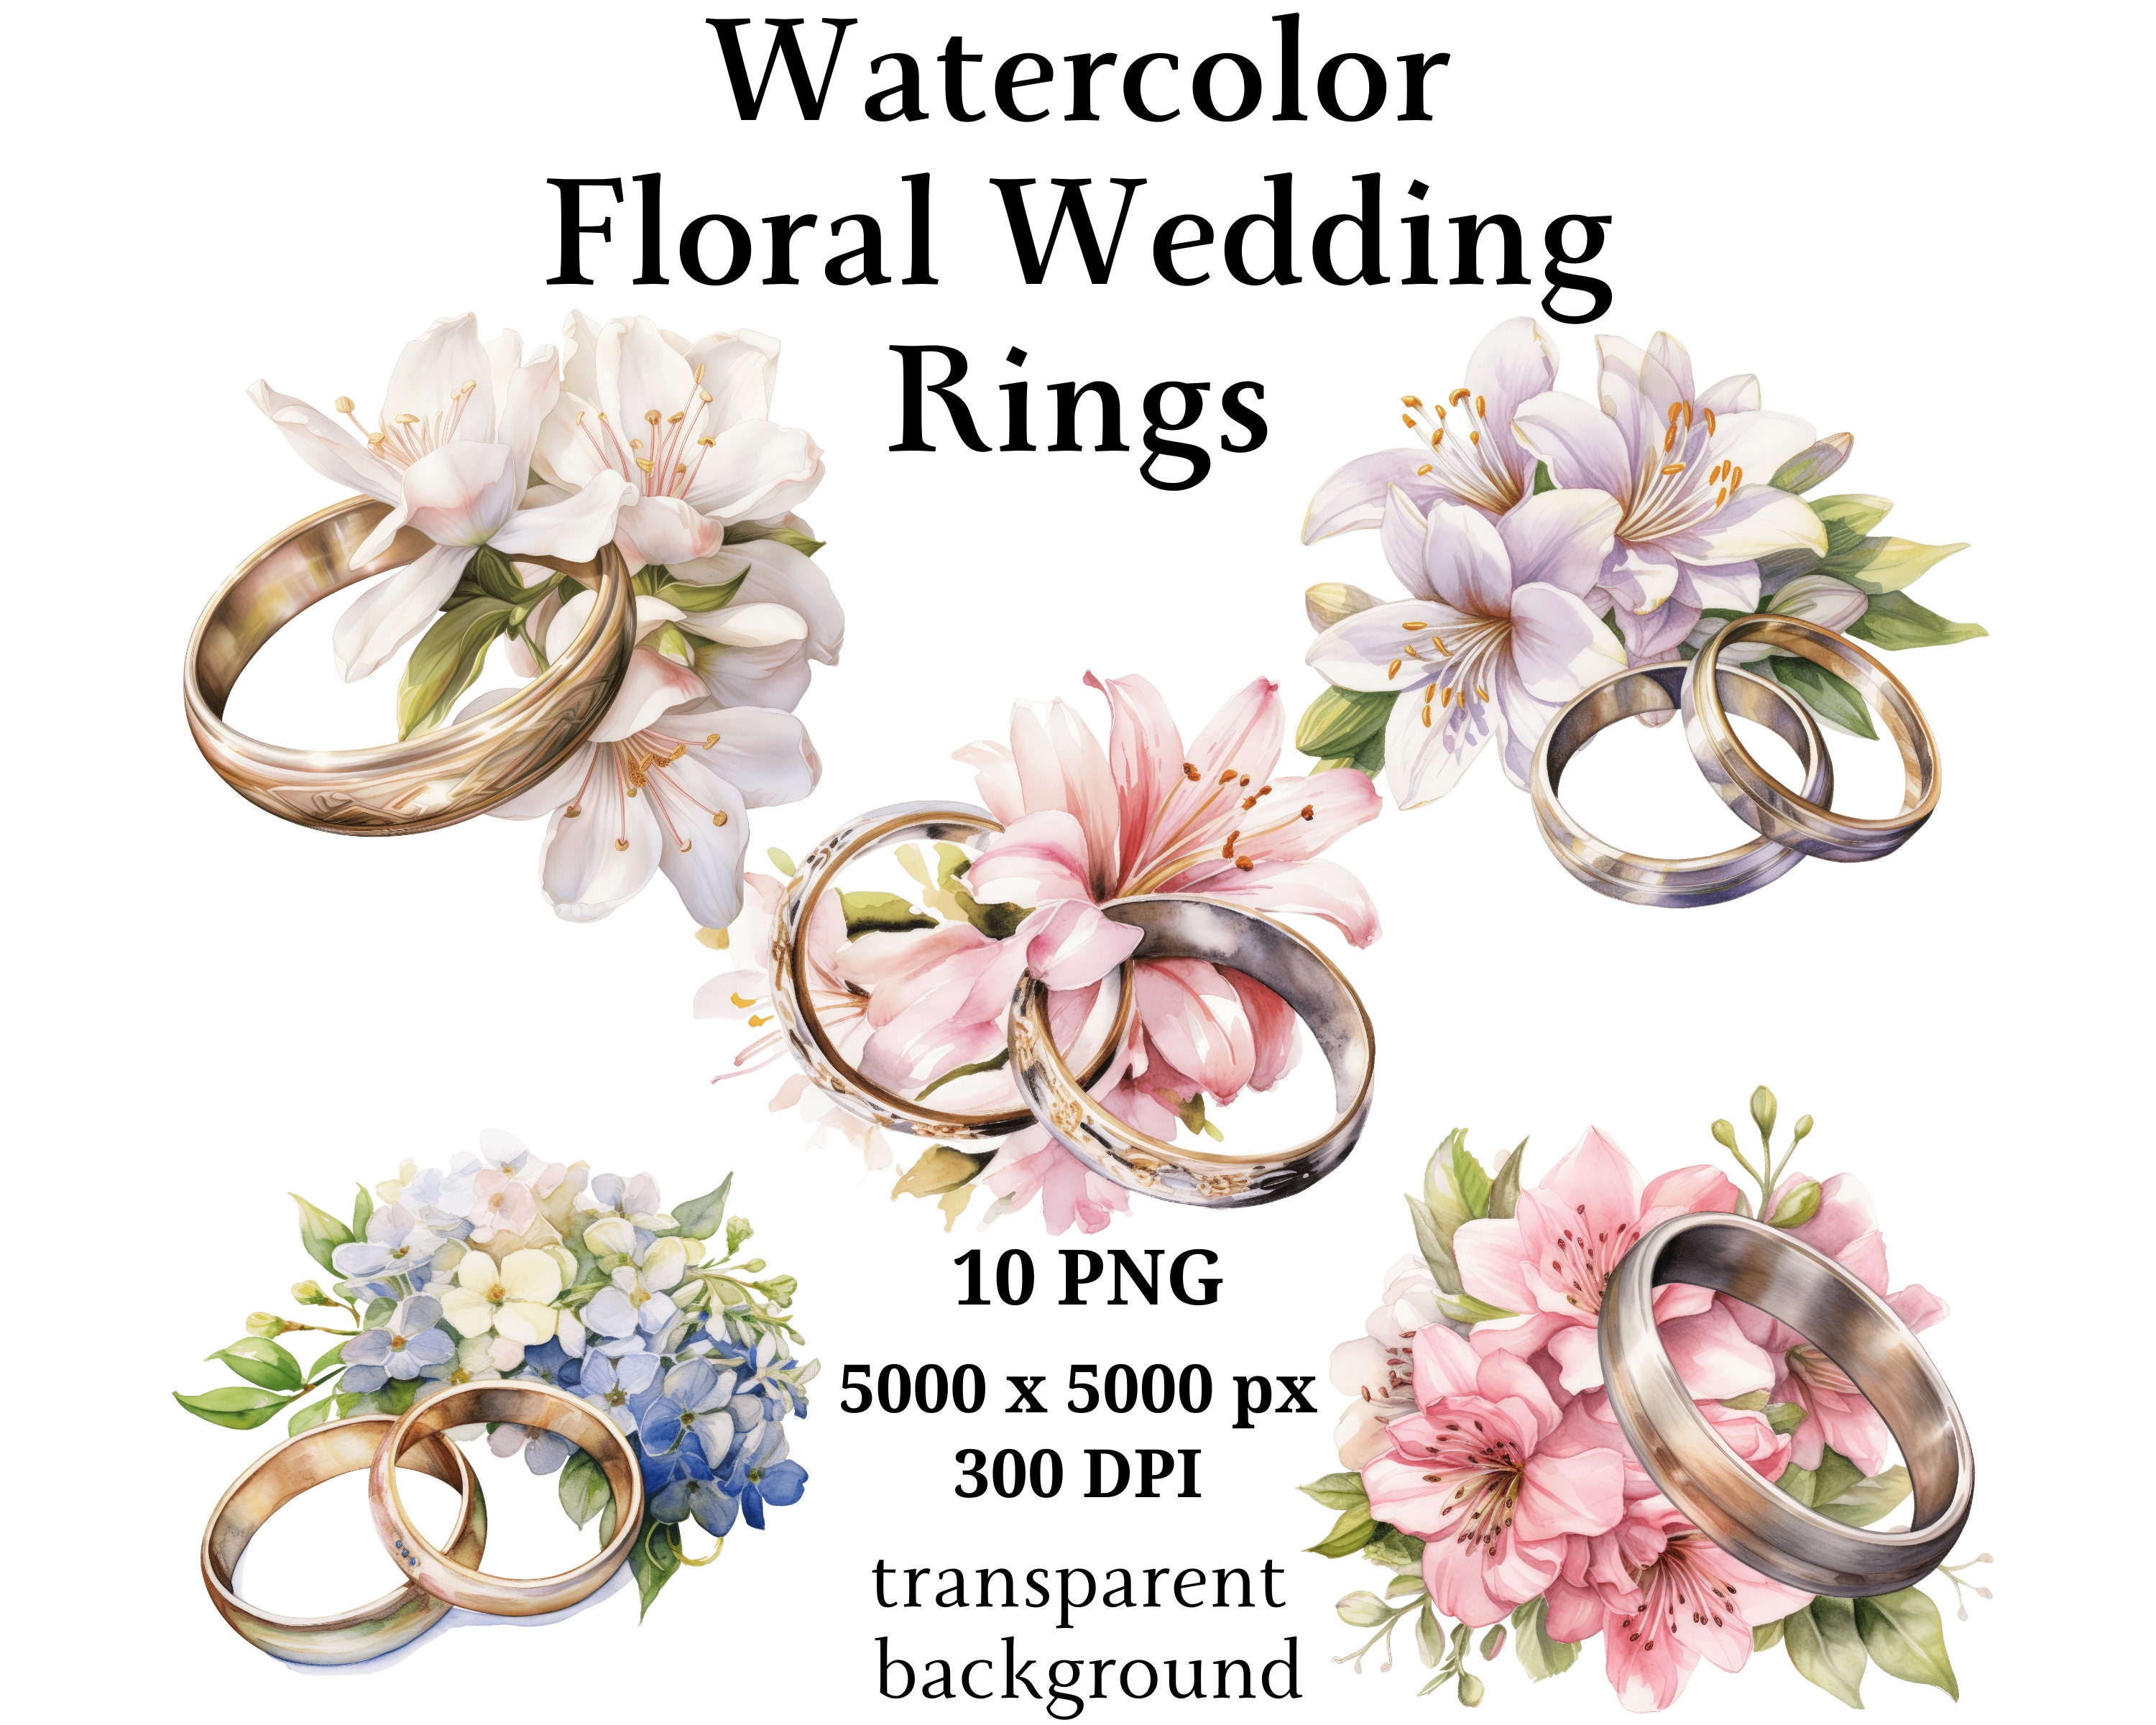 Flower Ring Images, HD Pictures For Free Vectors Download - Lovepik.com